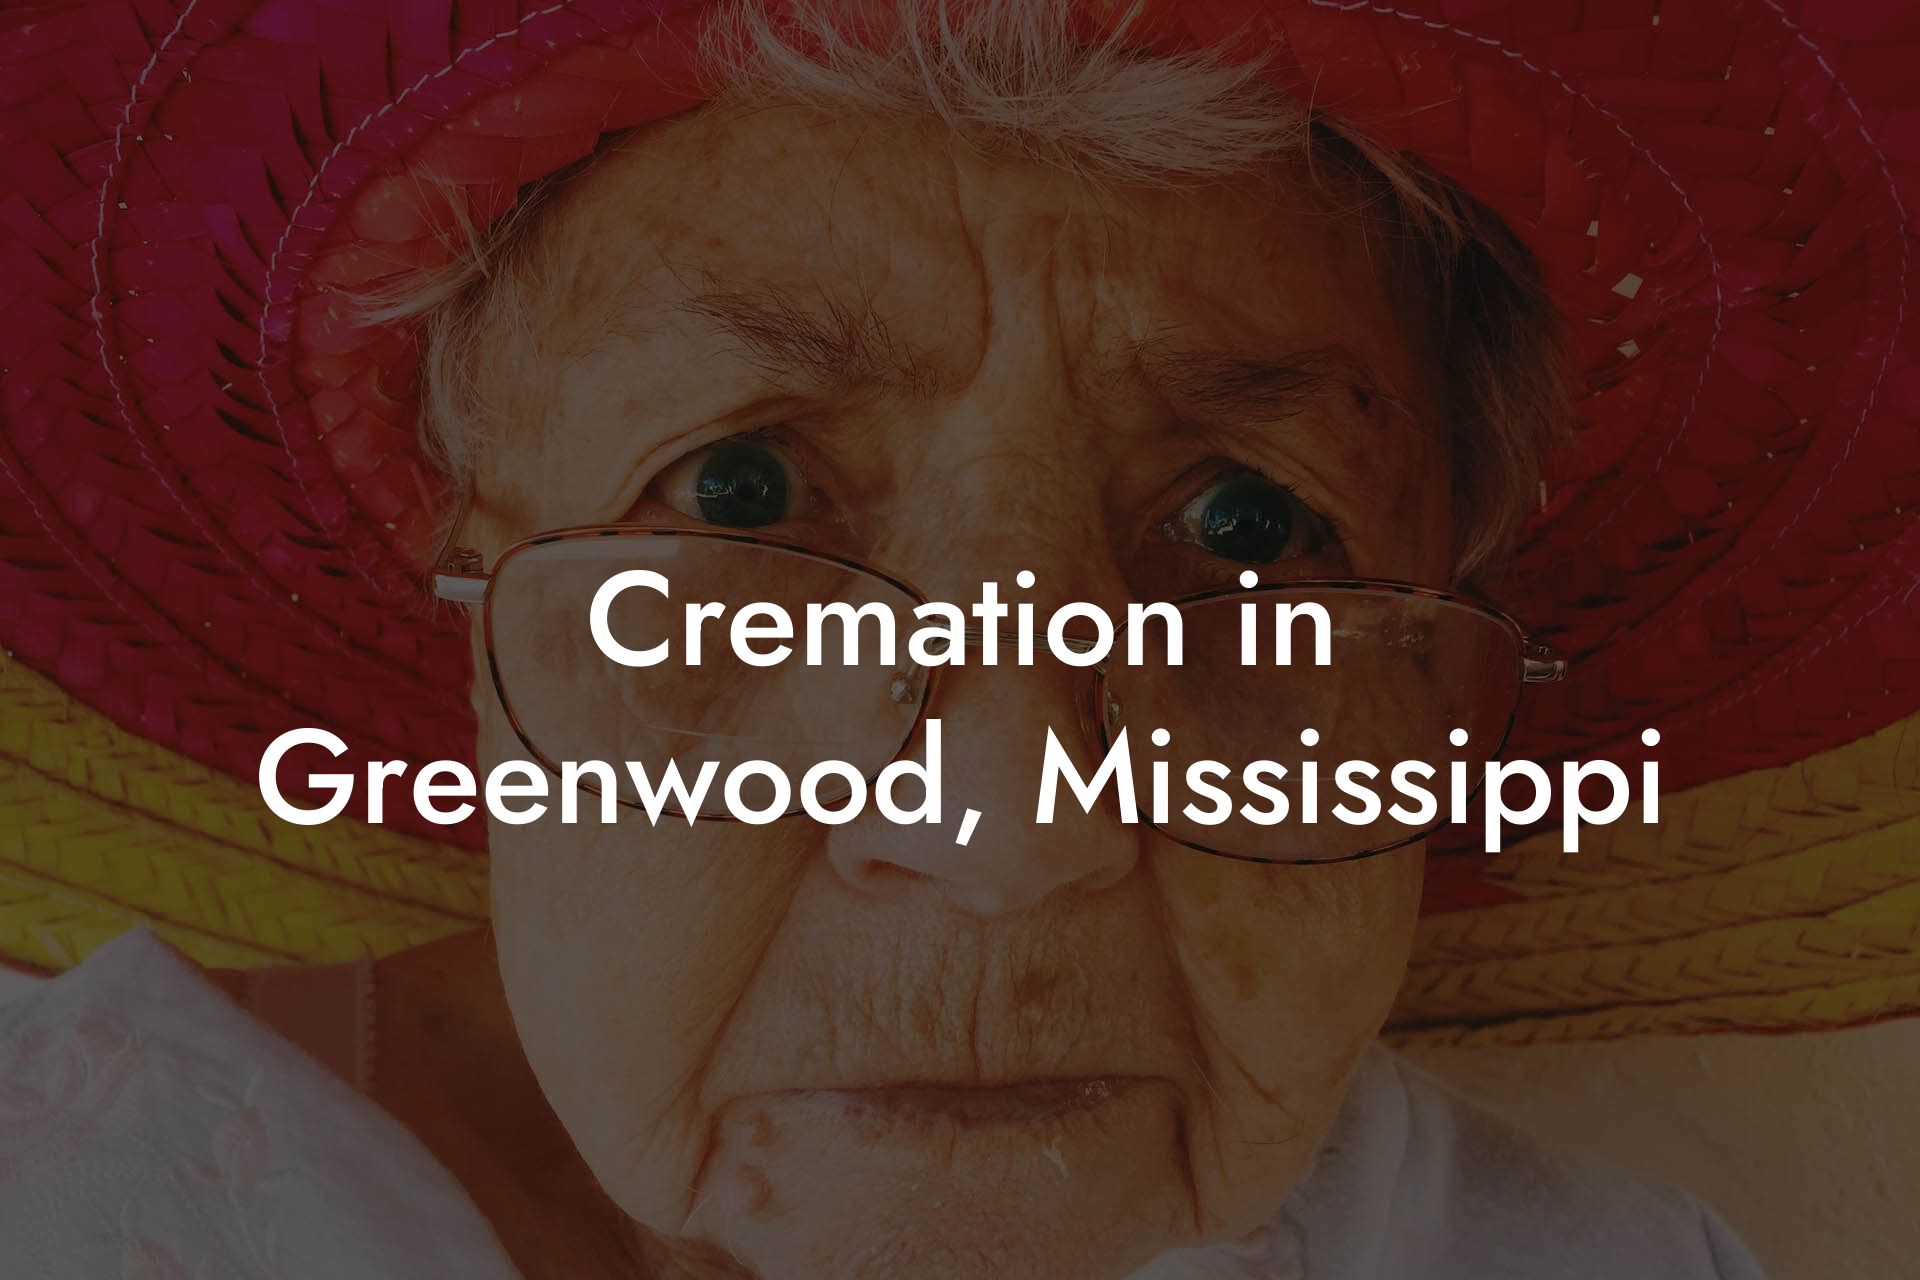 Cremation in Greenwood, Mississippi